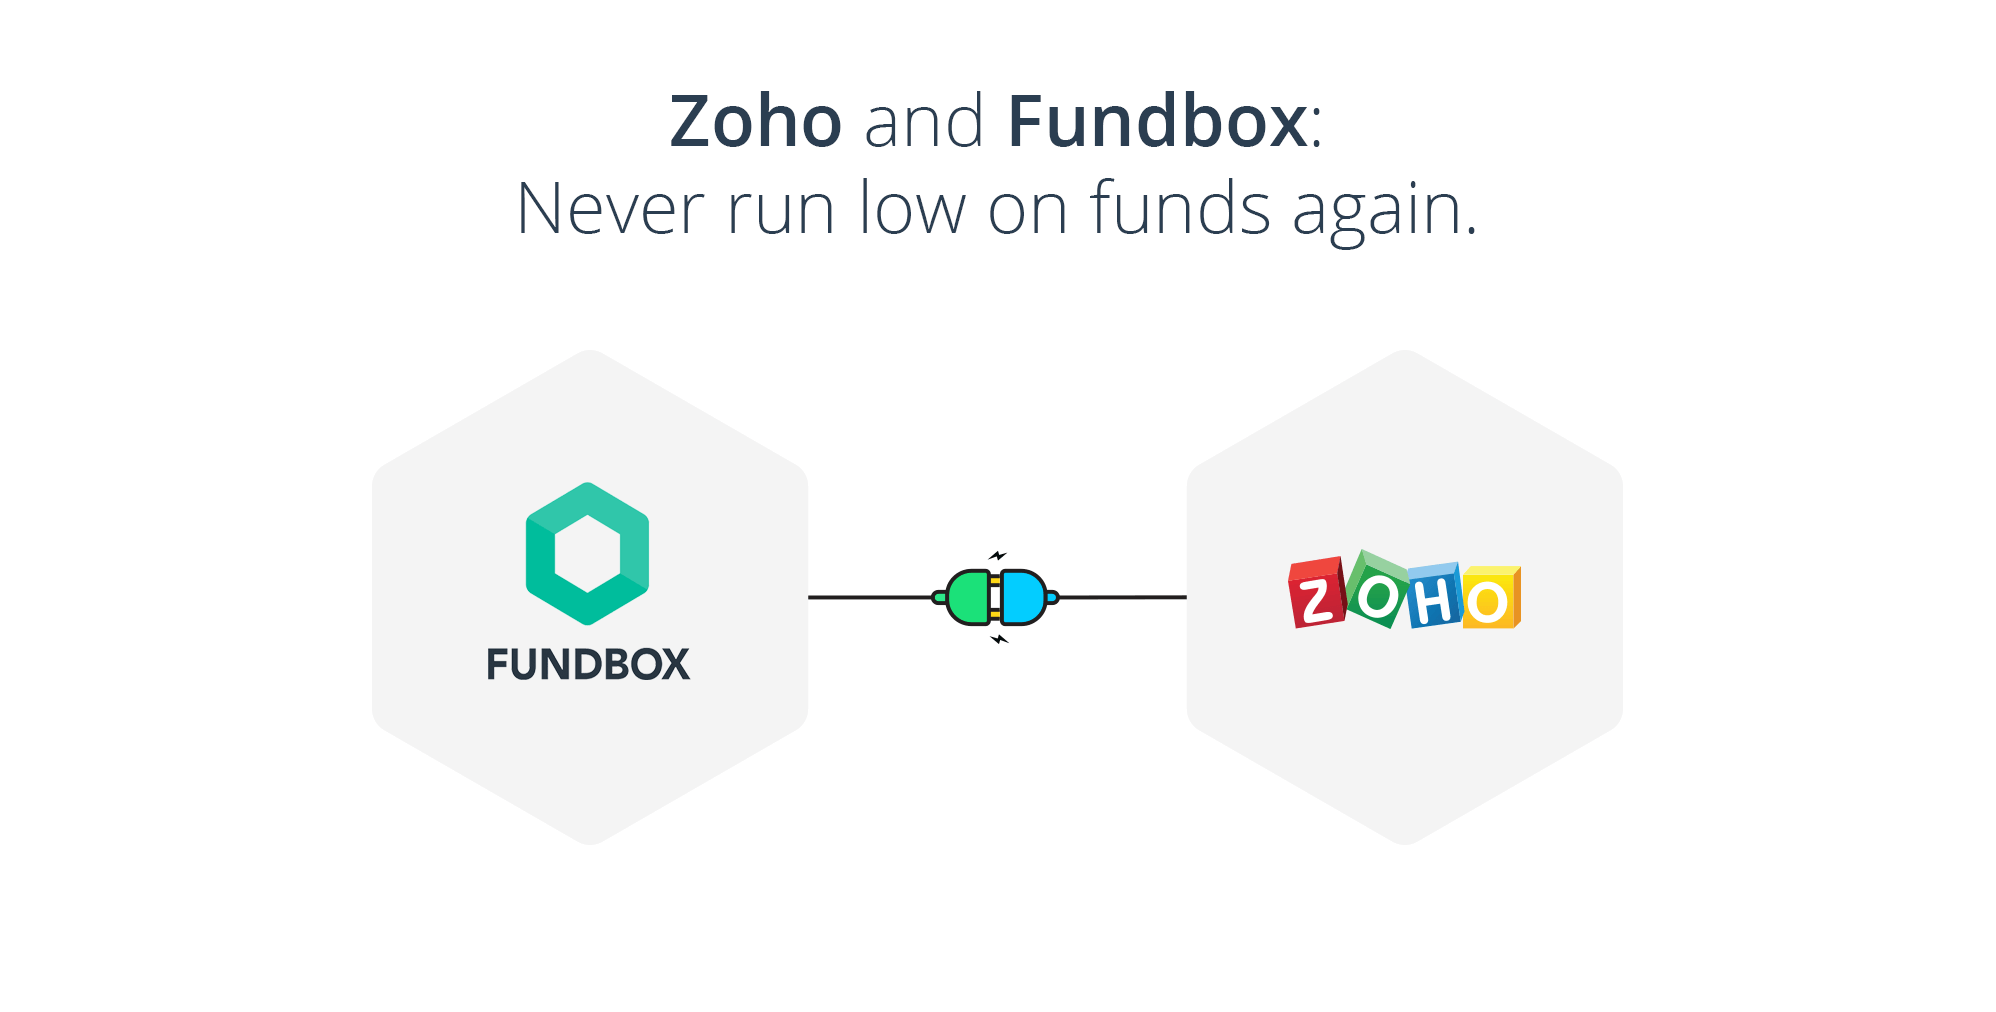 Zoho and Fundbox: Never run low on funds again. ​